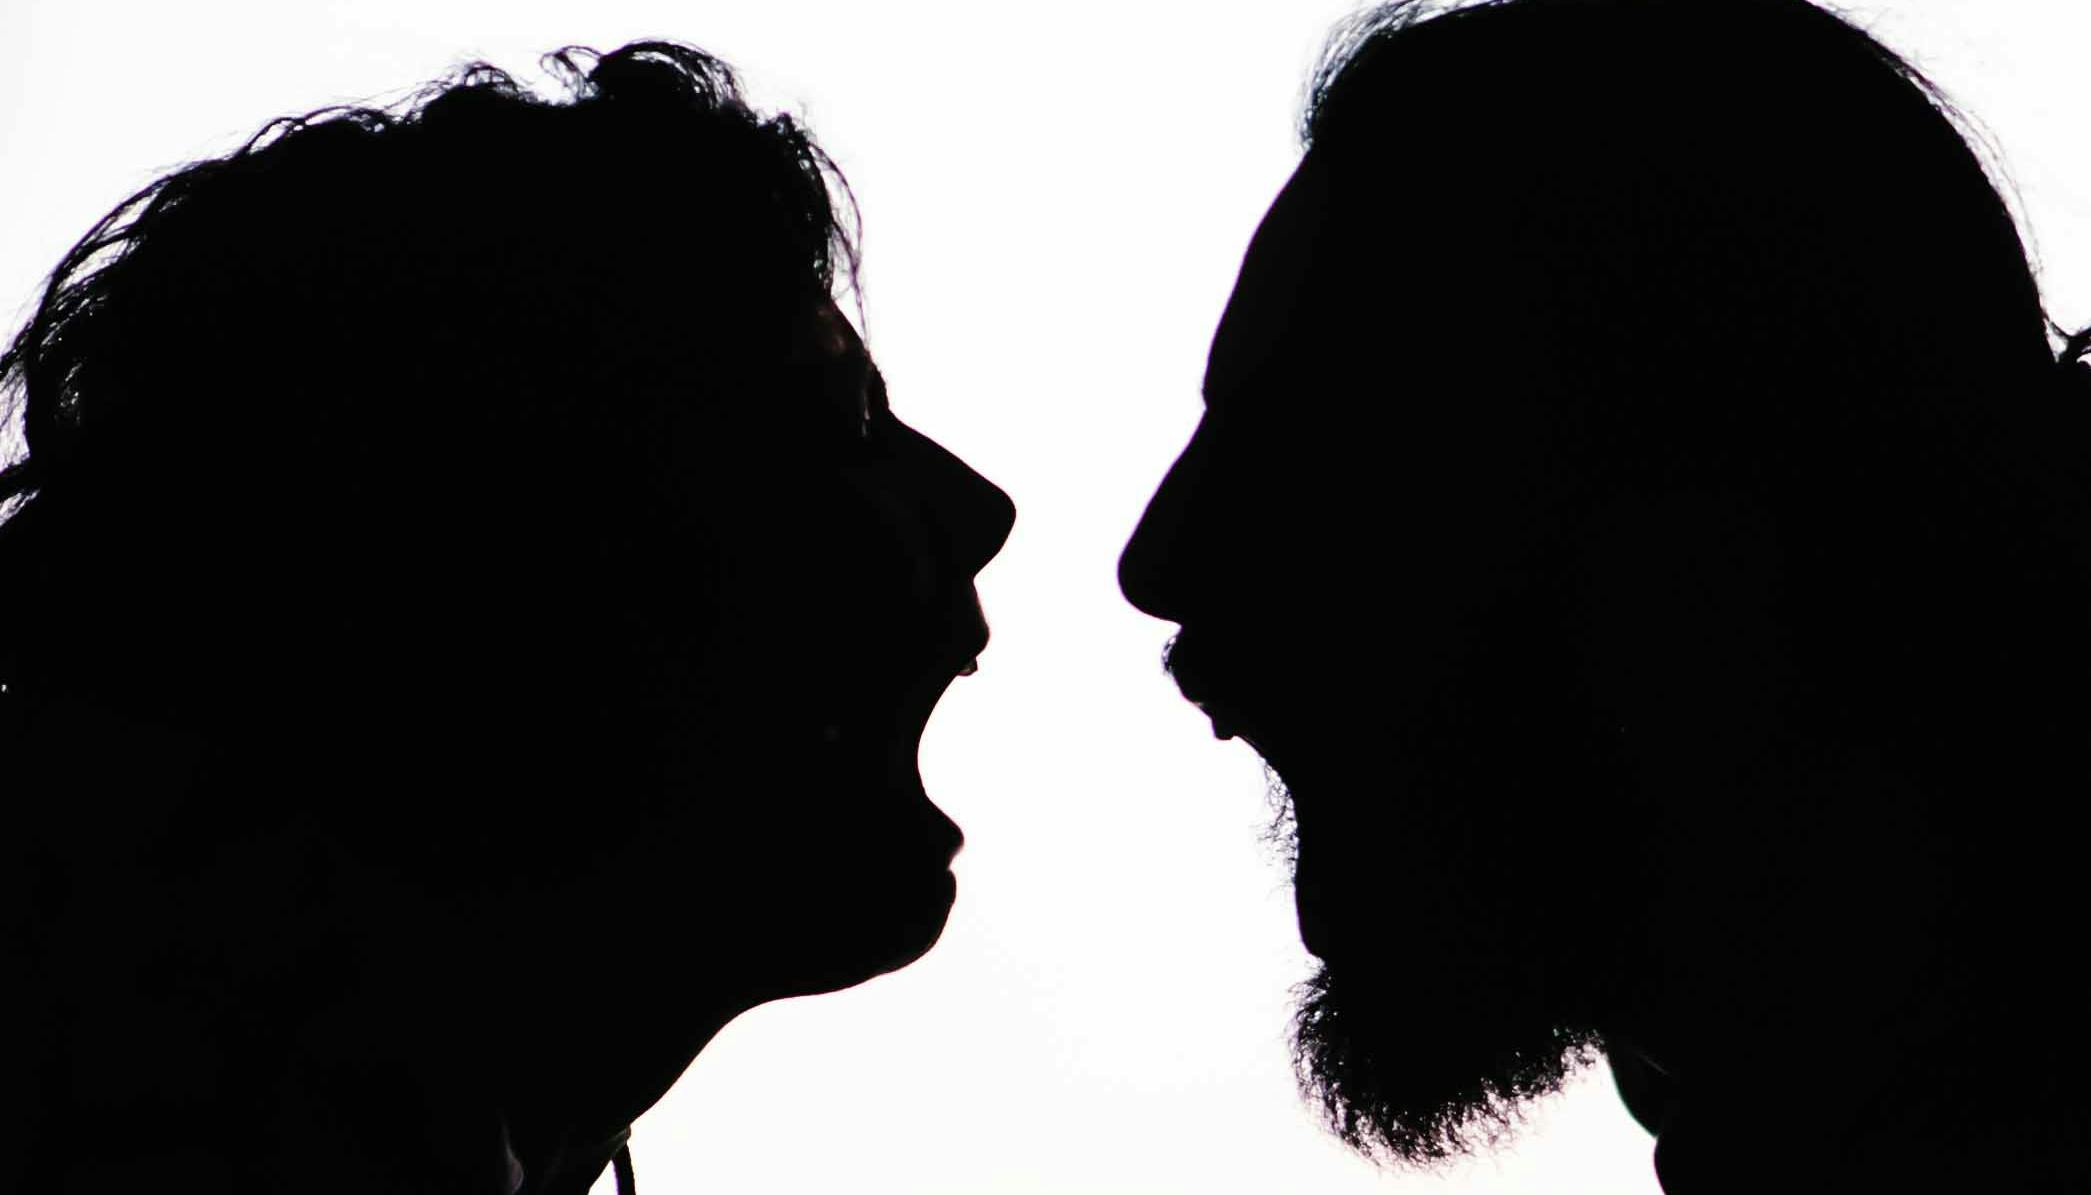 Backlit photo of Giselda and Michael in profile facing each other with mouths open as if in a scream